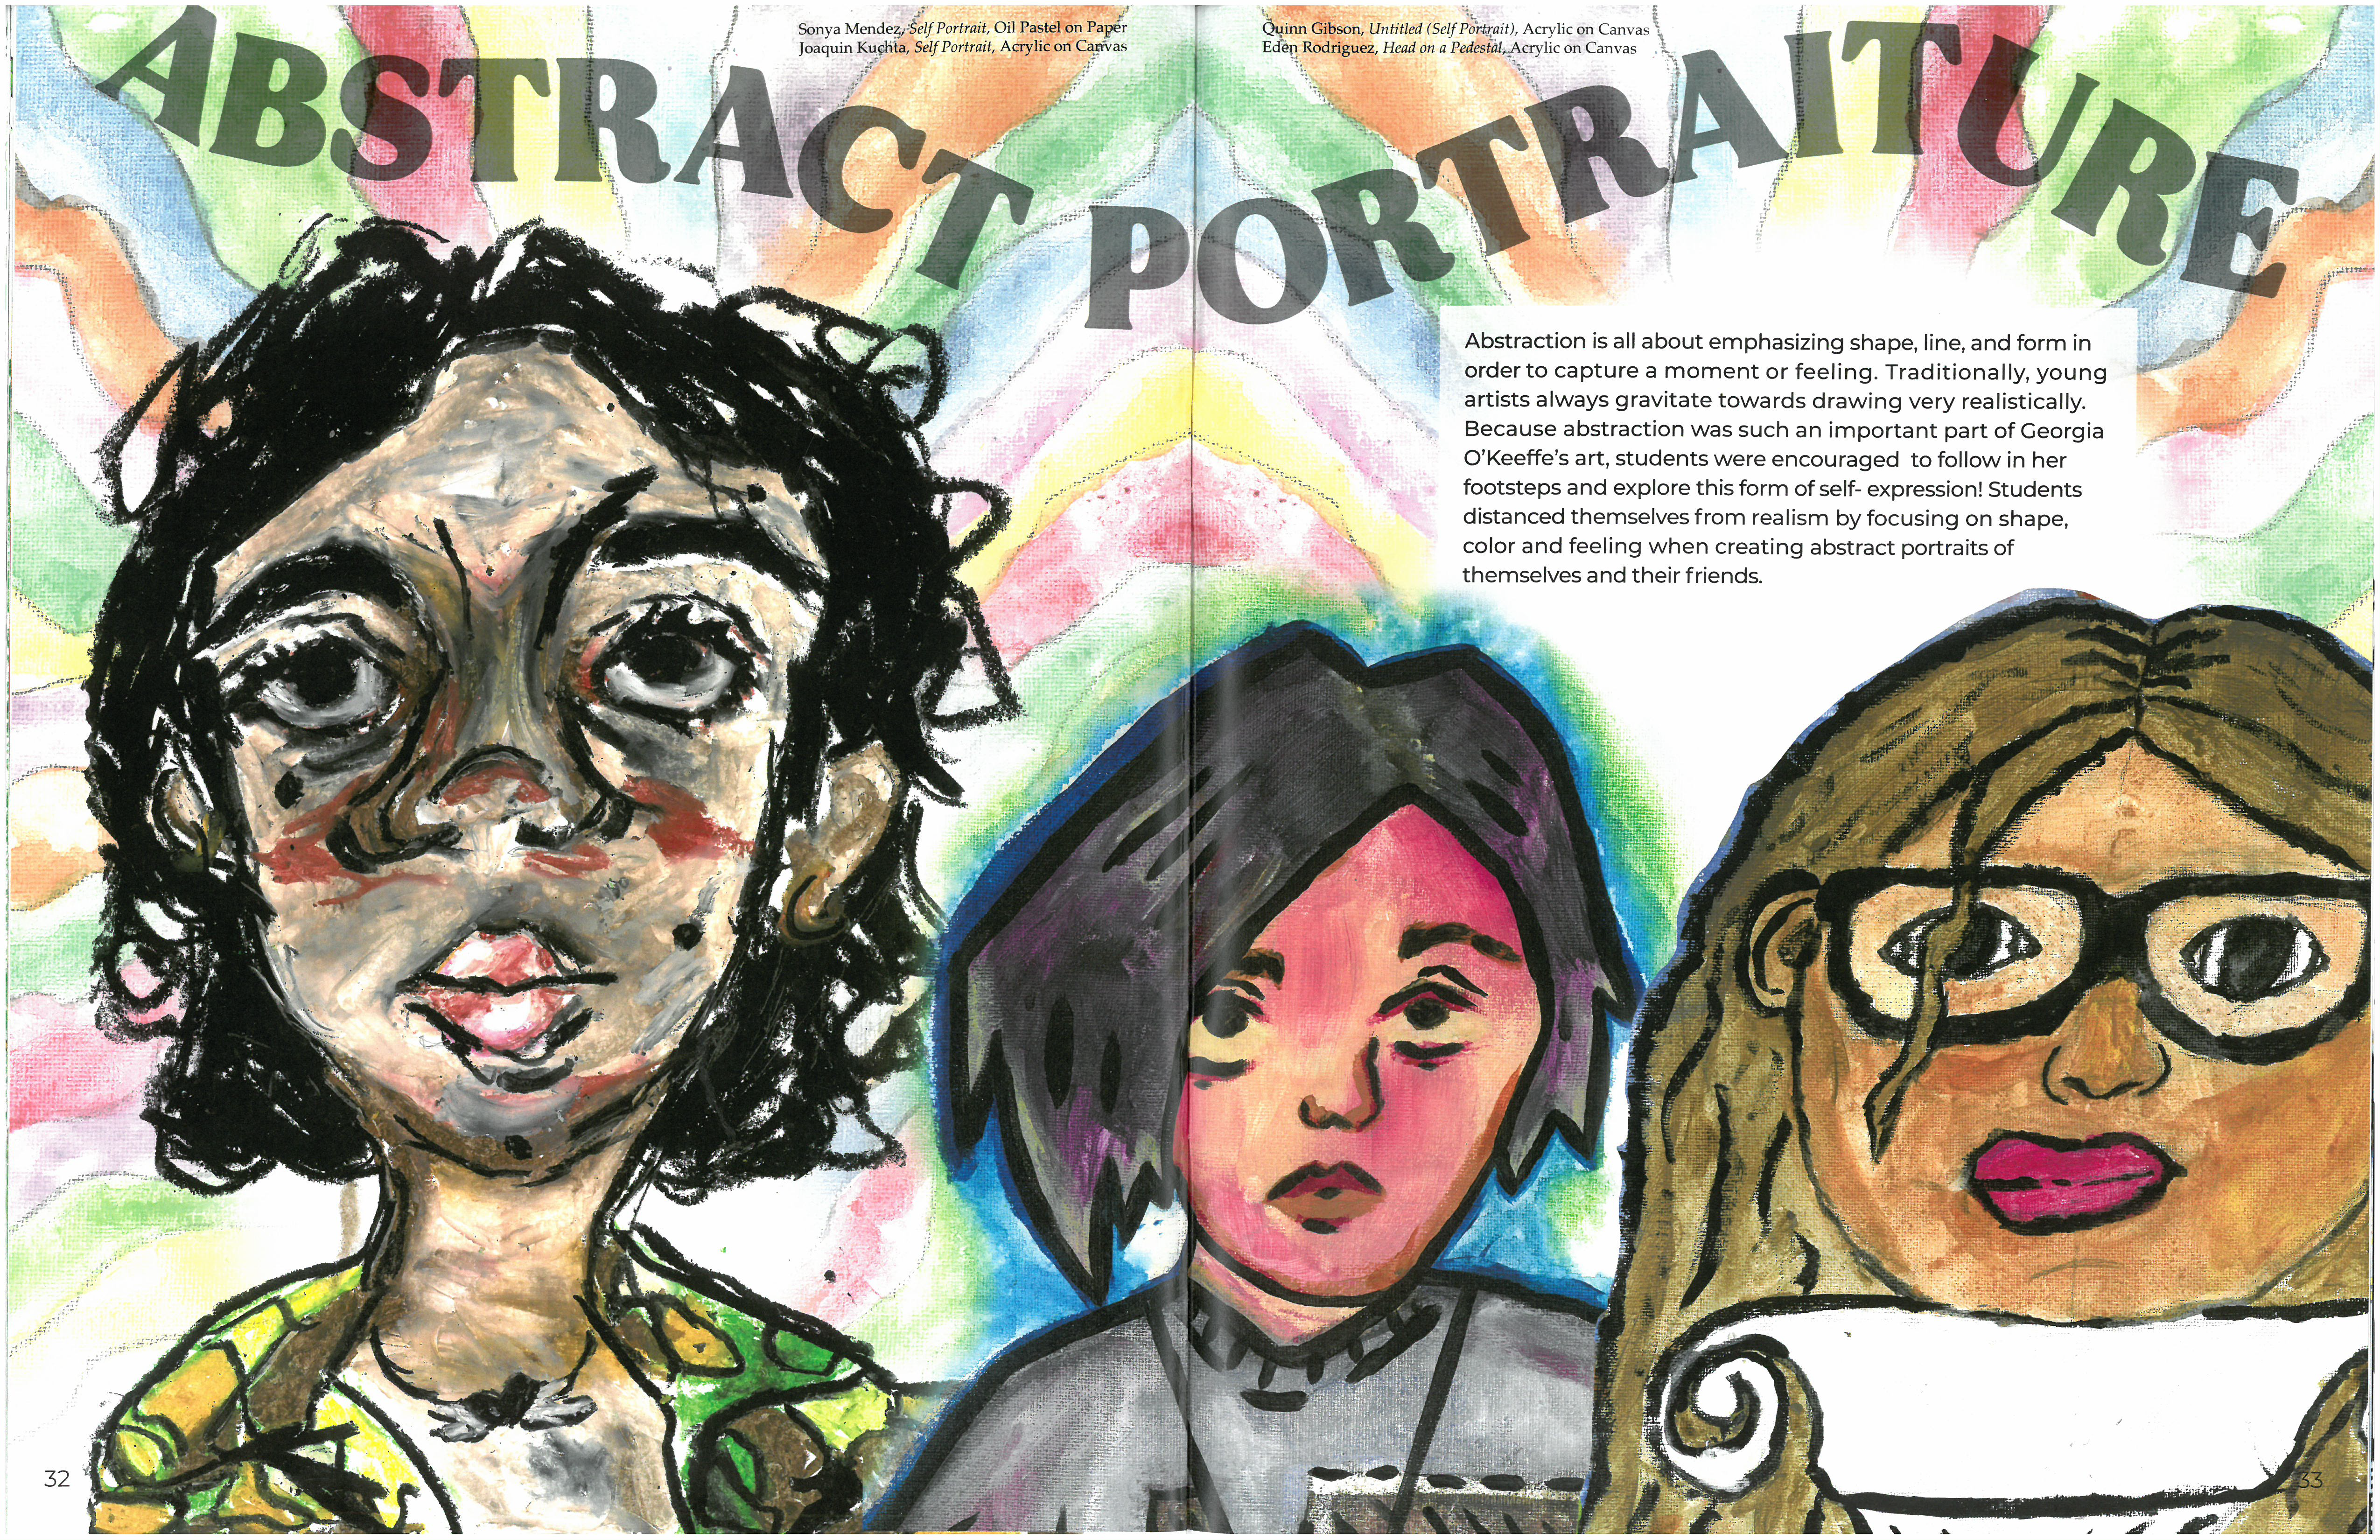 Portraits done by students from the A&L program